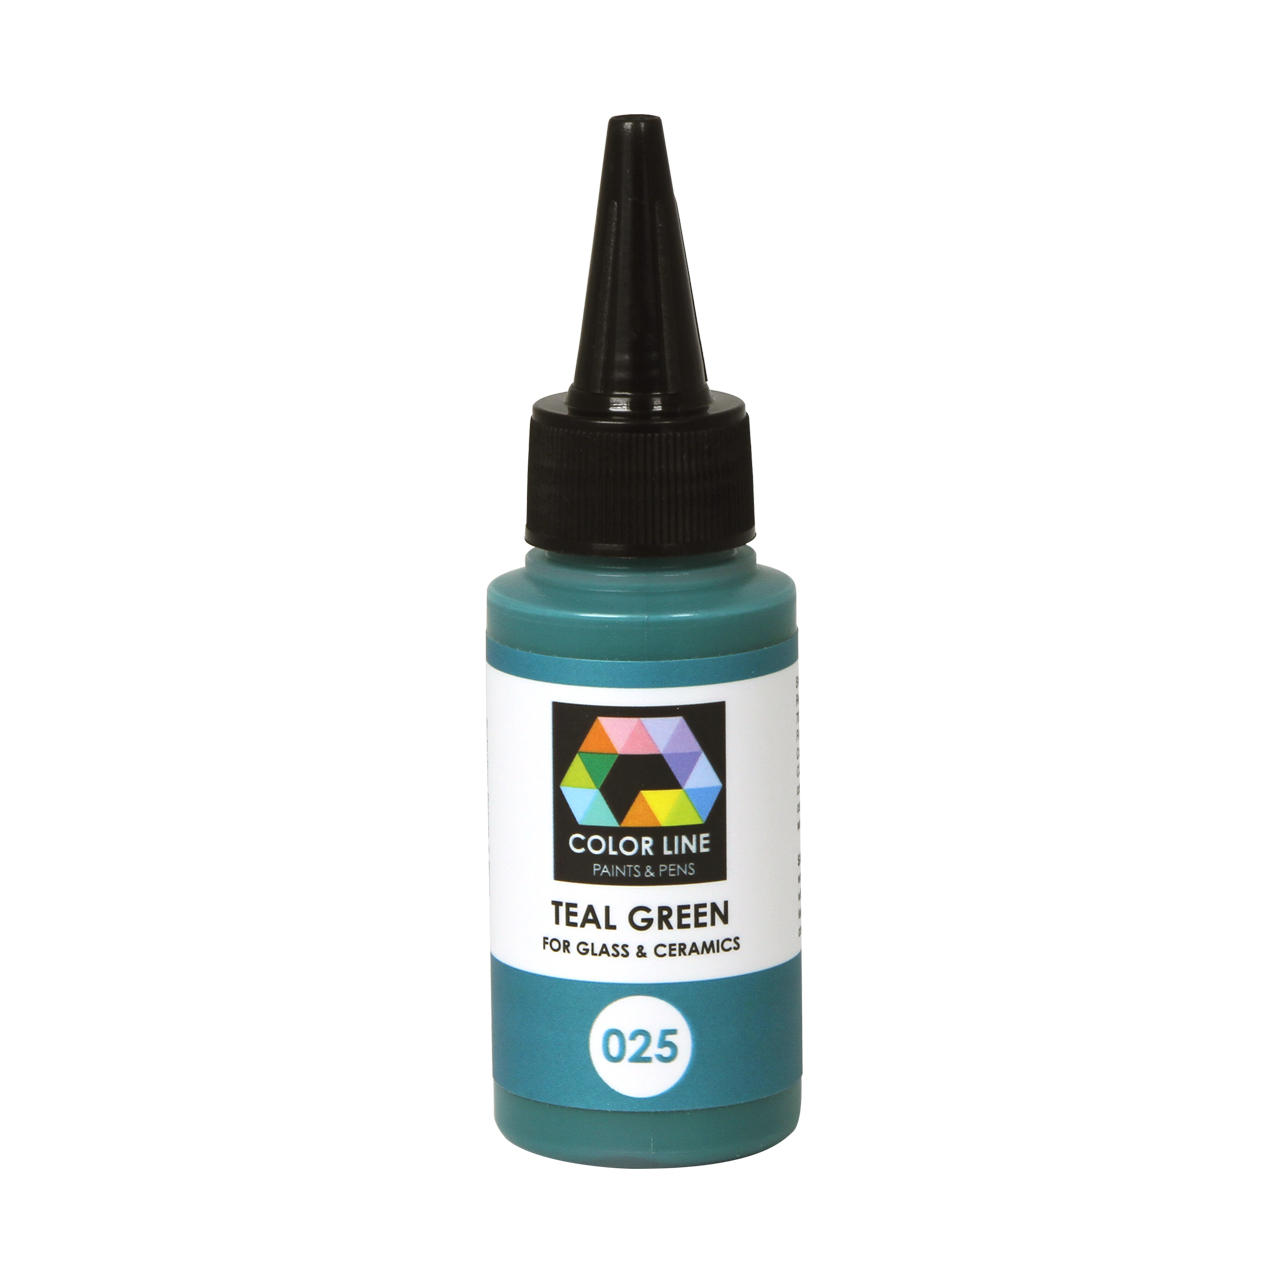 Color Line Paint 025 teal green 62g